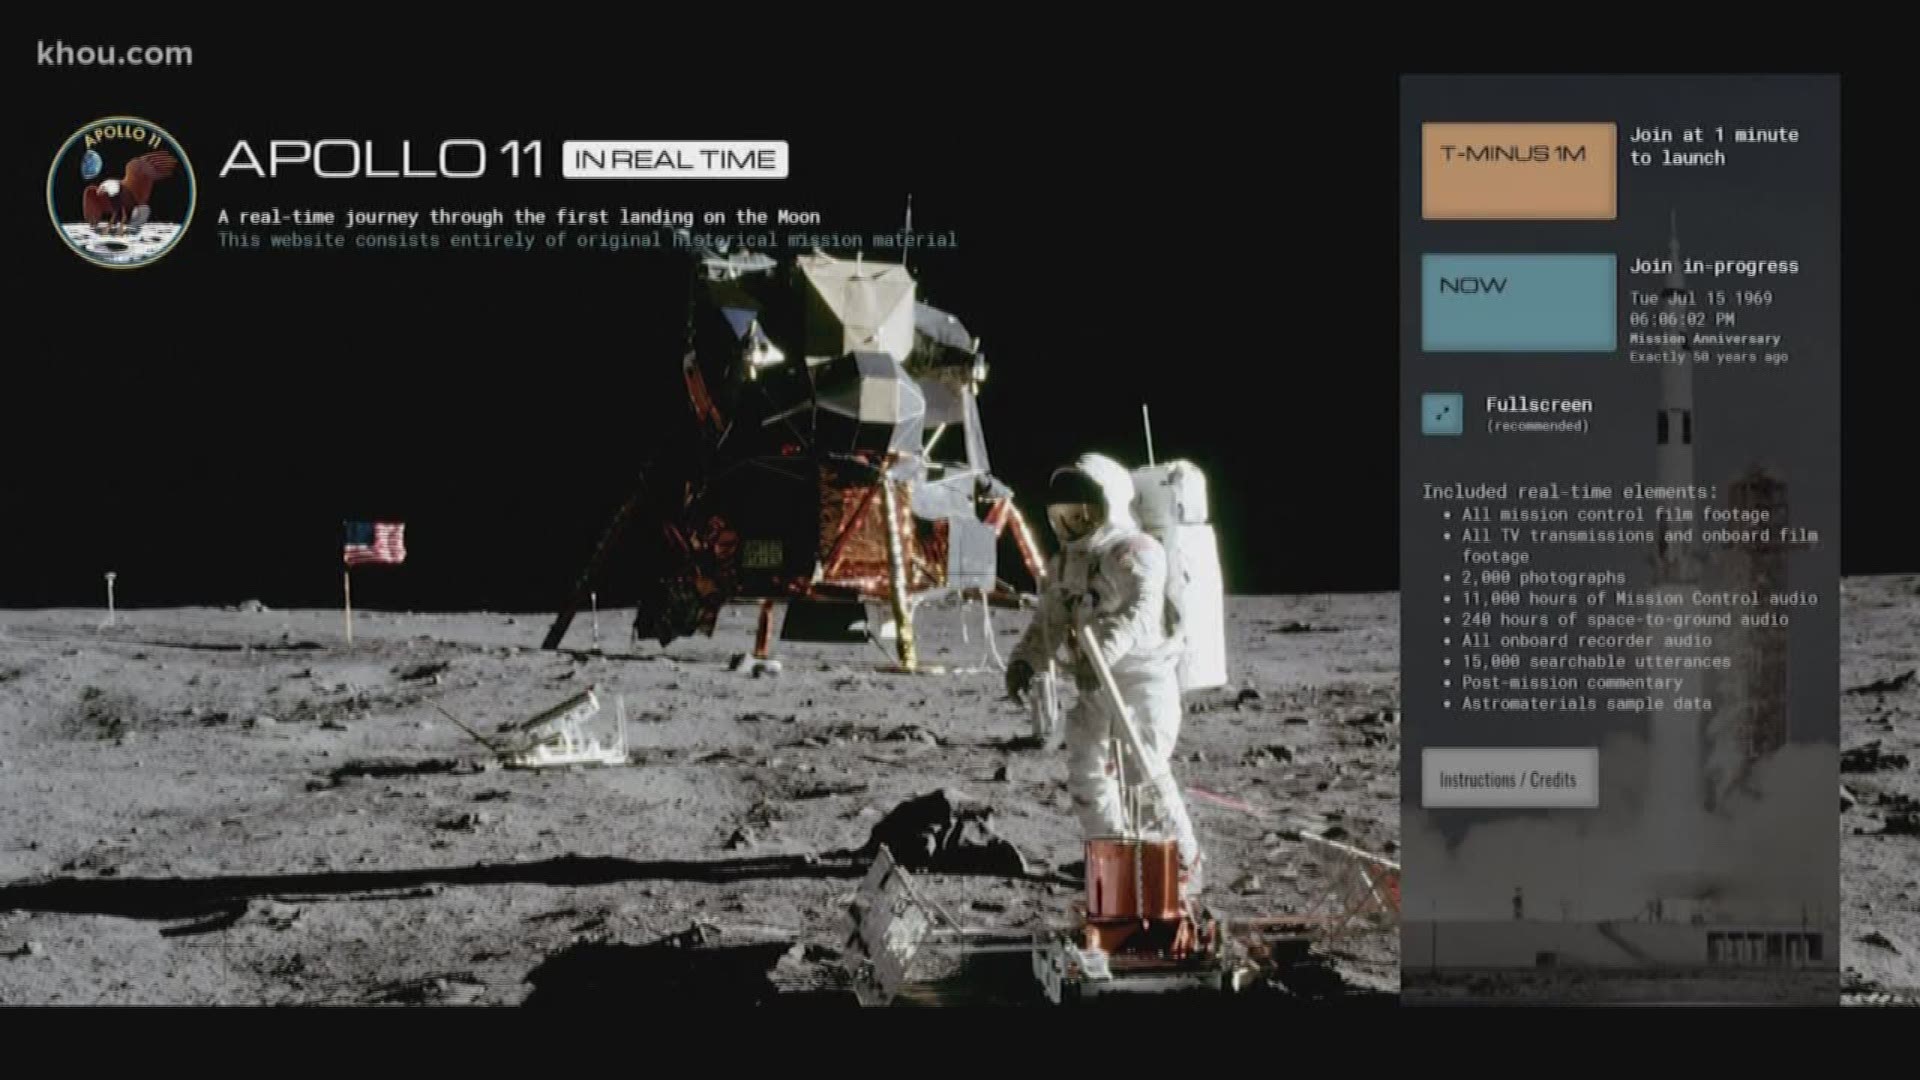 A local software developer spent the last two years building a website that on Tuesday, will play back the Apollo 11 mission as it happened 50 years ago in 1969.